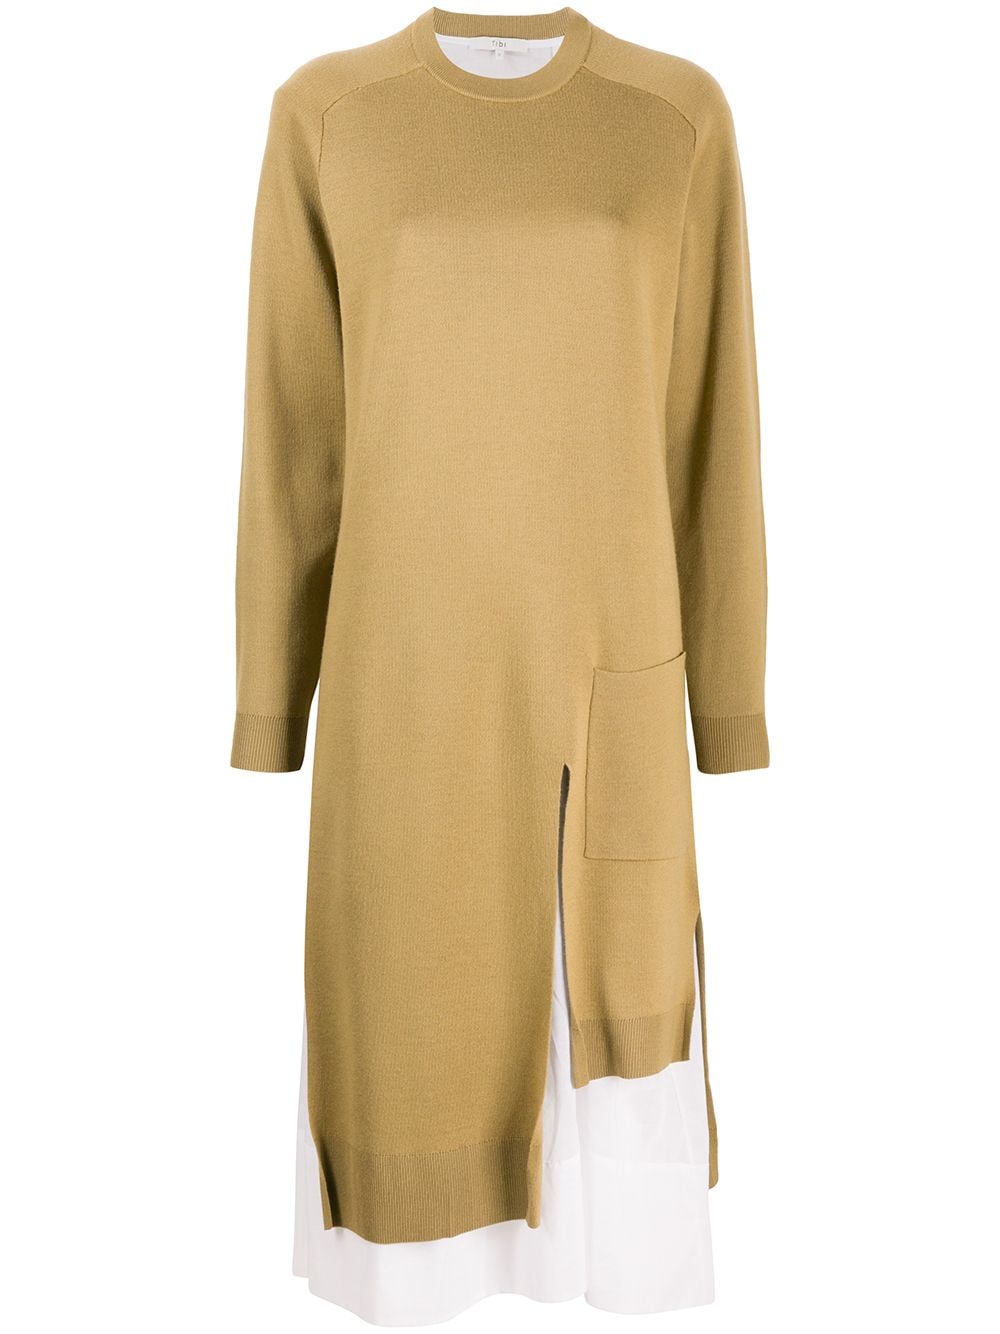 TIBI LINED KNITTED DRESS